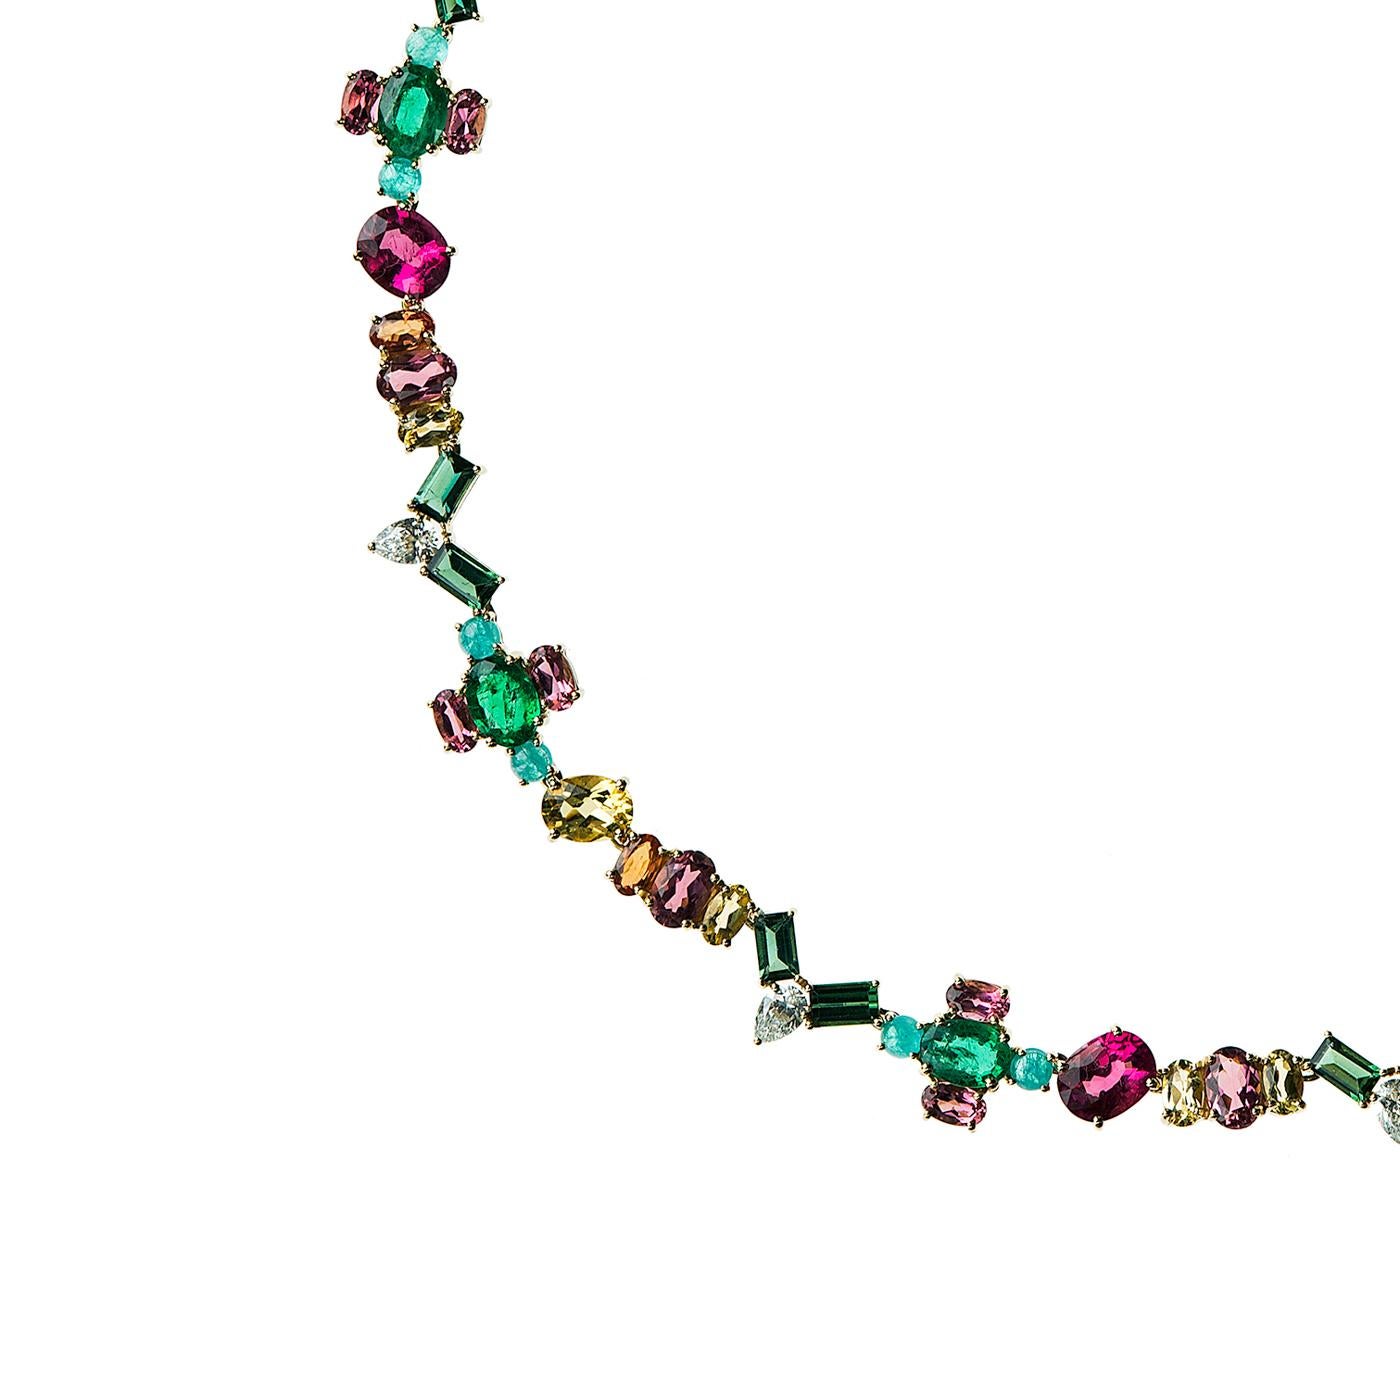 Nikos Koulis Eden Collection one-of-a-kind 18K yellow gold necklace with 2.15 cts with 6.15 cts emeralds, 2.15 cts white diamonds, 2.69 cts paraibas, 2.41 cts orange sapphires, 1.75 cts yellow sapphires, 5.59 cts green beryls, 4.27 cts pink beryls